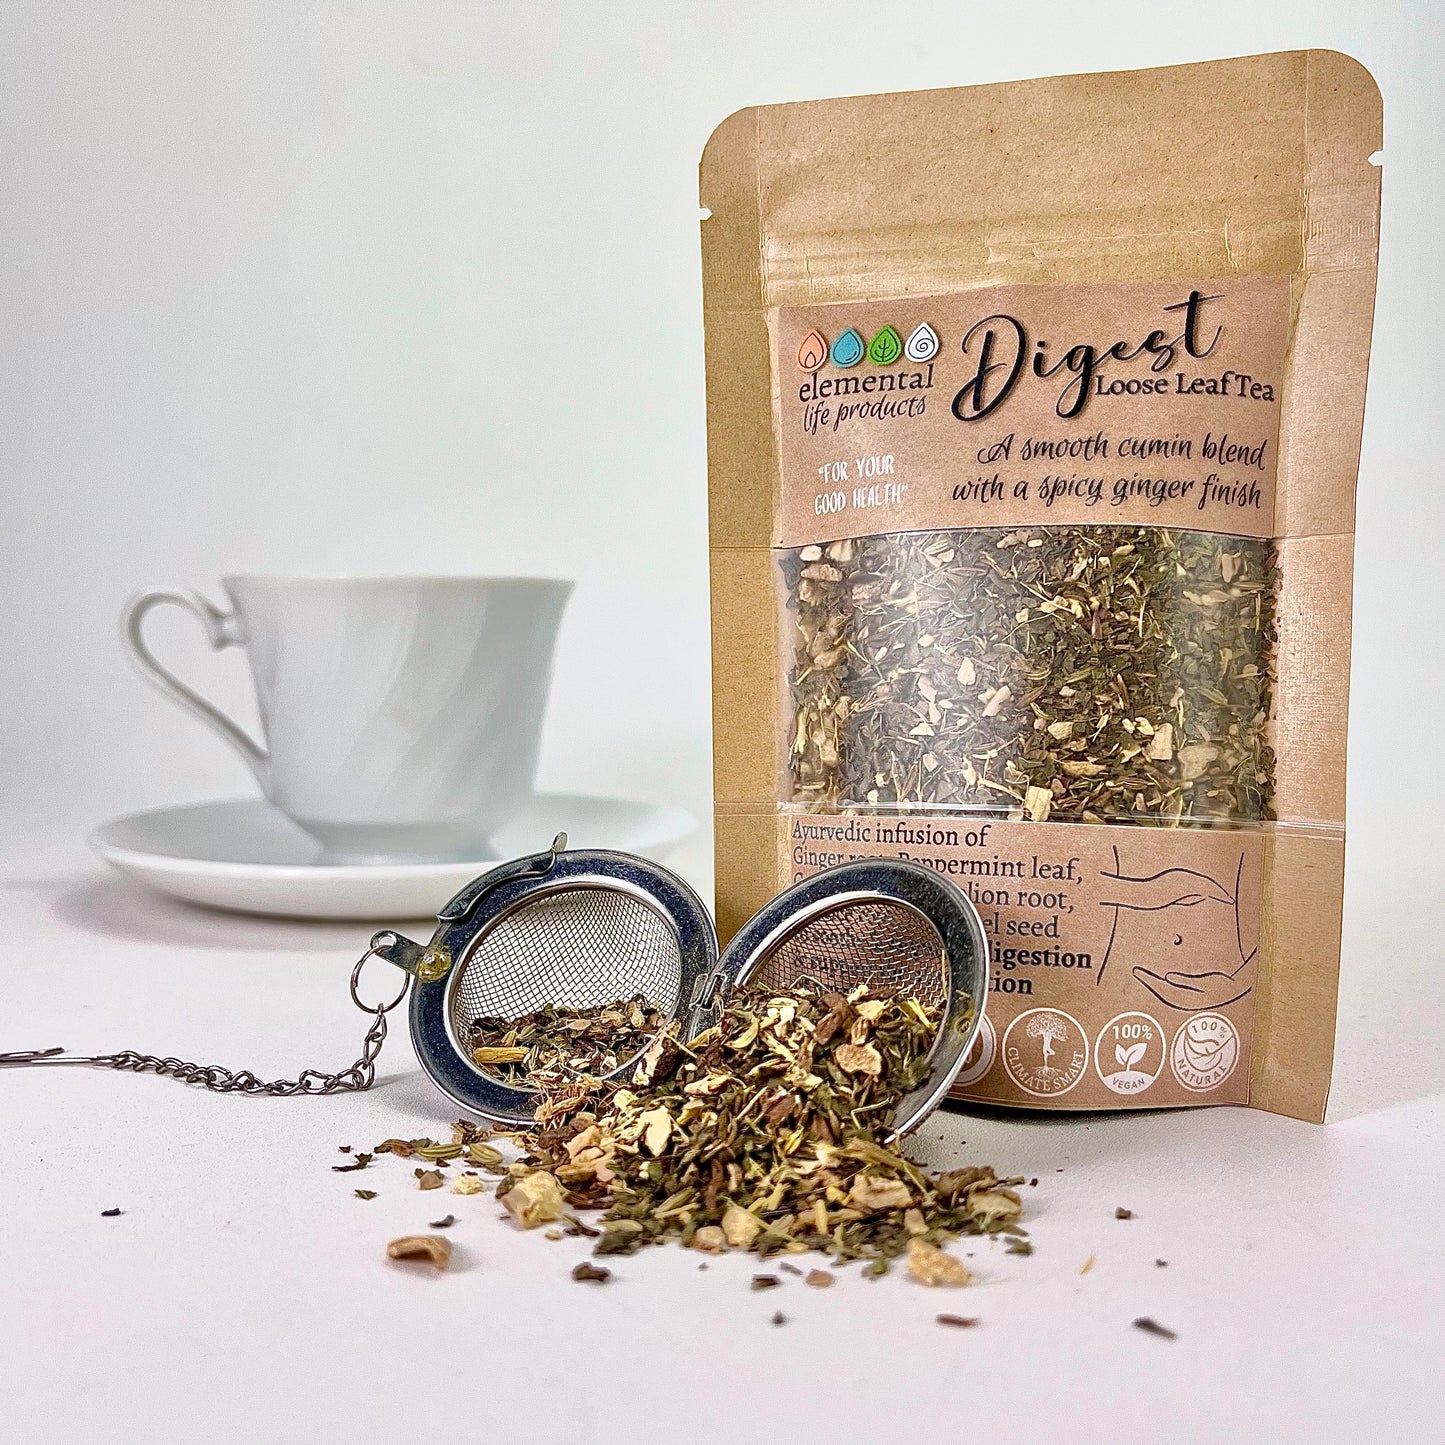 Elemental Life Product's Digest loose leaf tea blend with Ginger, Peppermint, and Cumin seed with a tea ball and tea cup